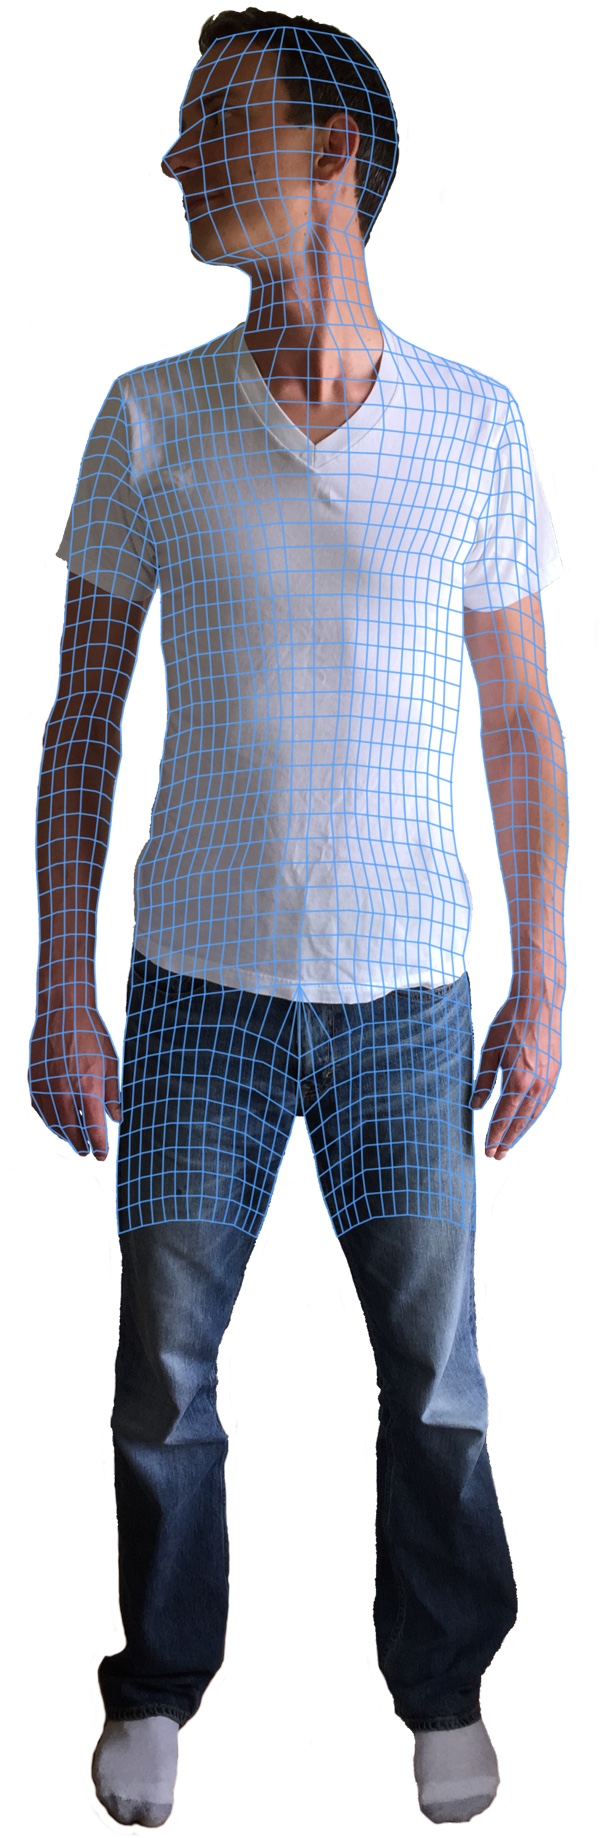 Visualization of the web-like nature of fascia on Man's Body